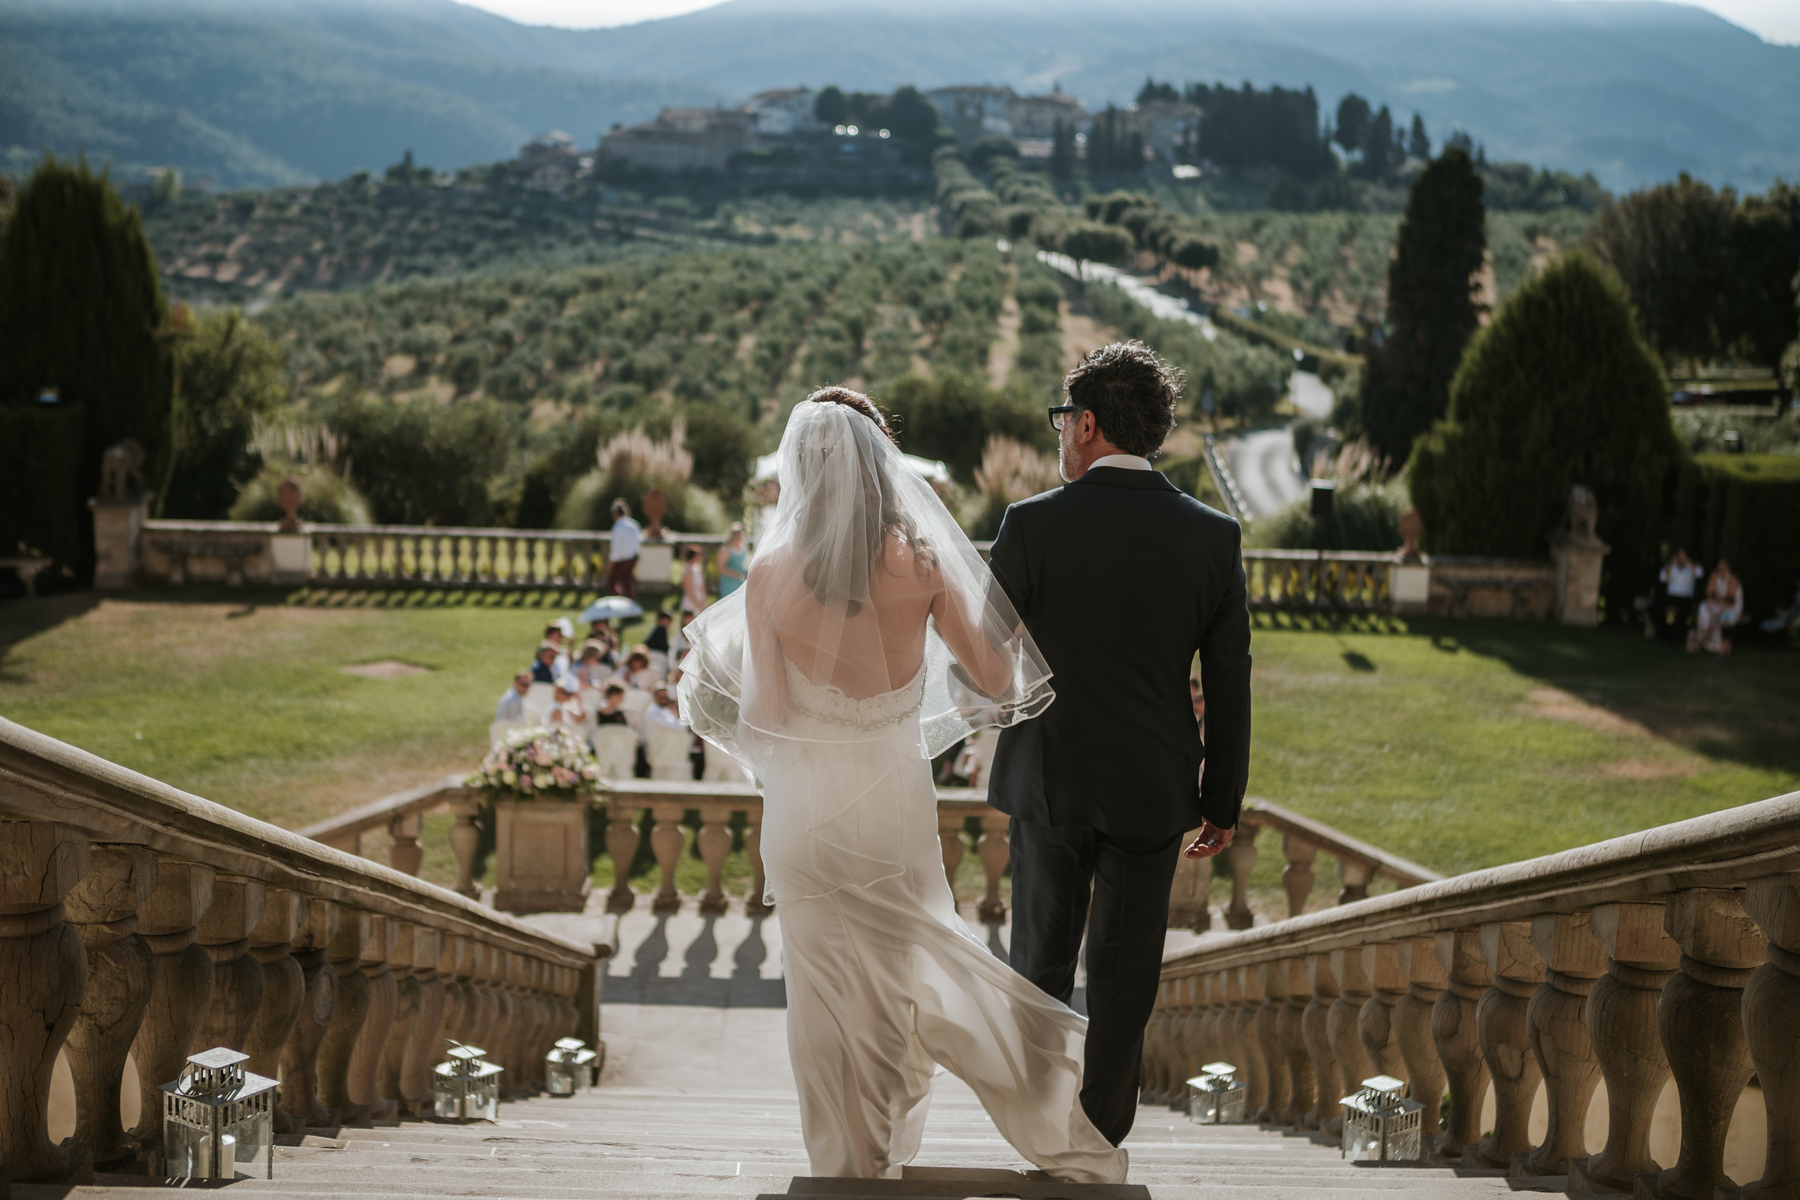 Wedding in Tuscany, Italy - Wedding Planner based in Florence